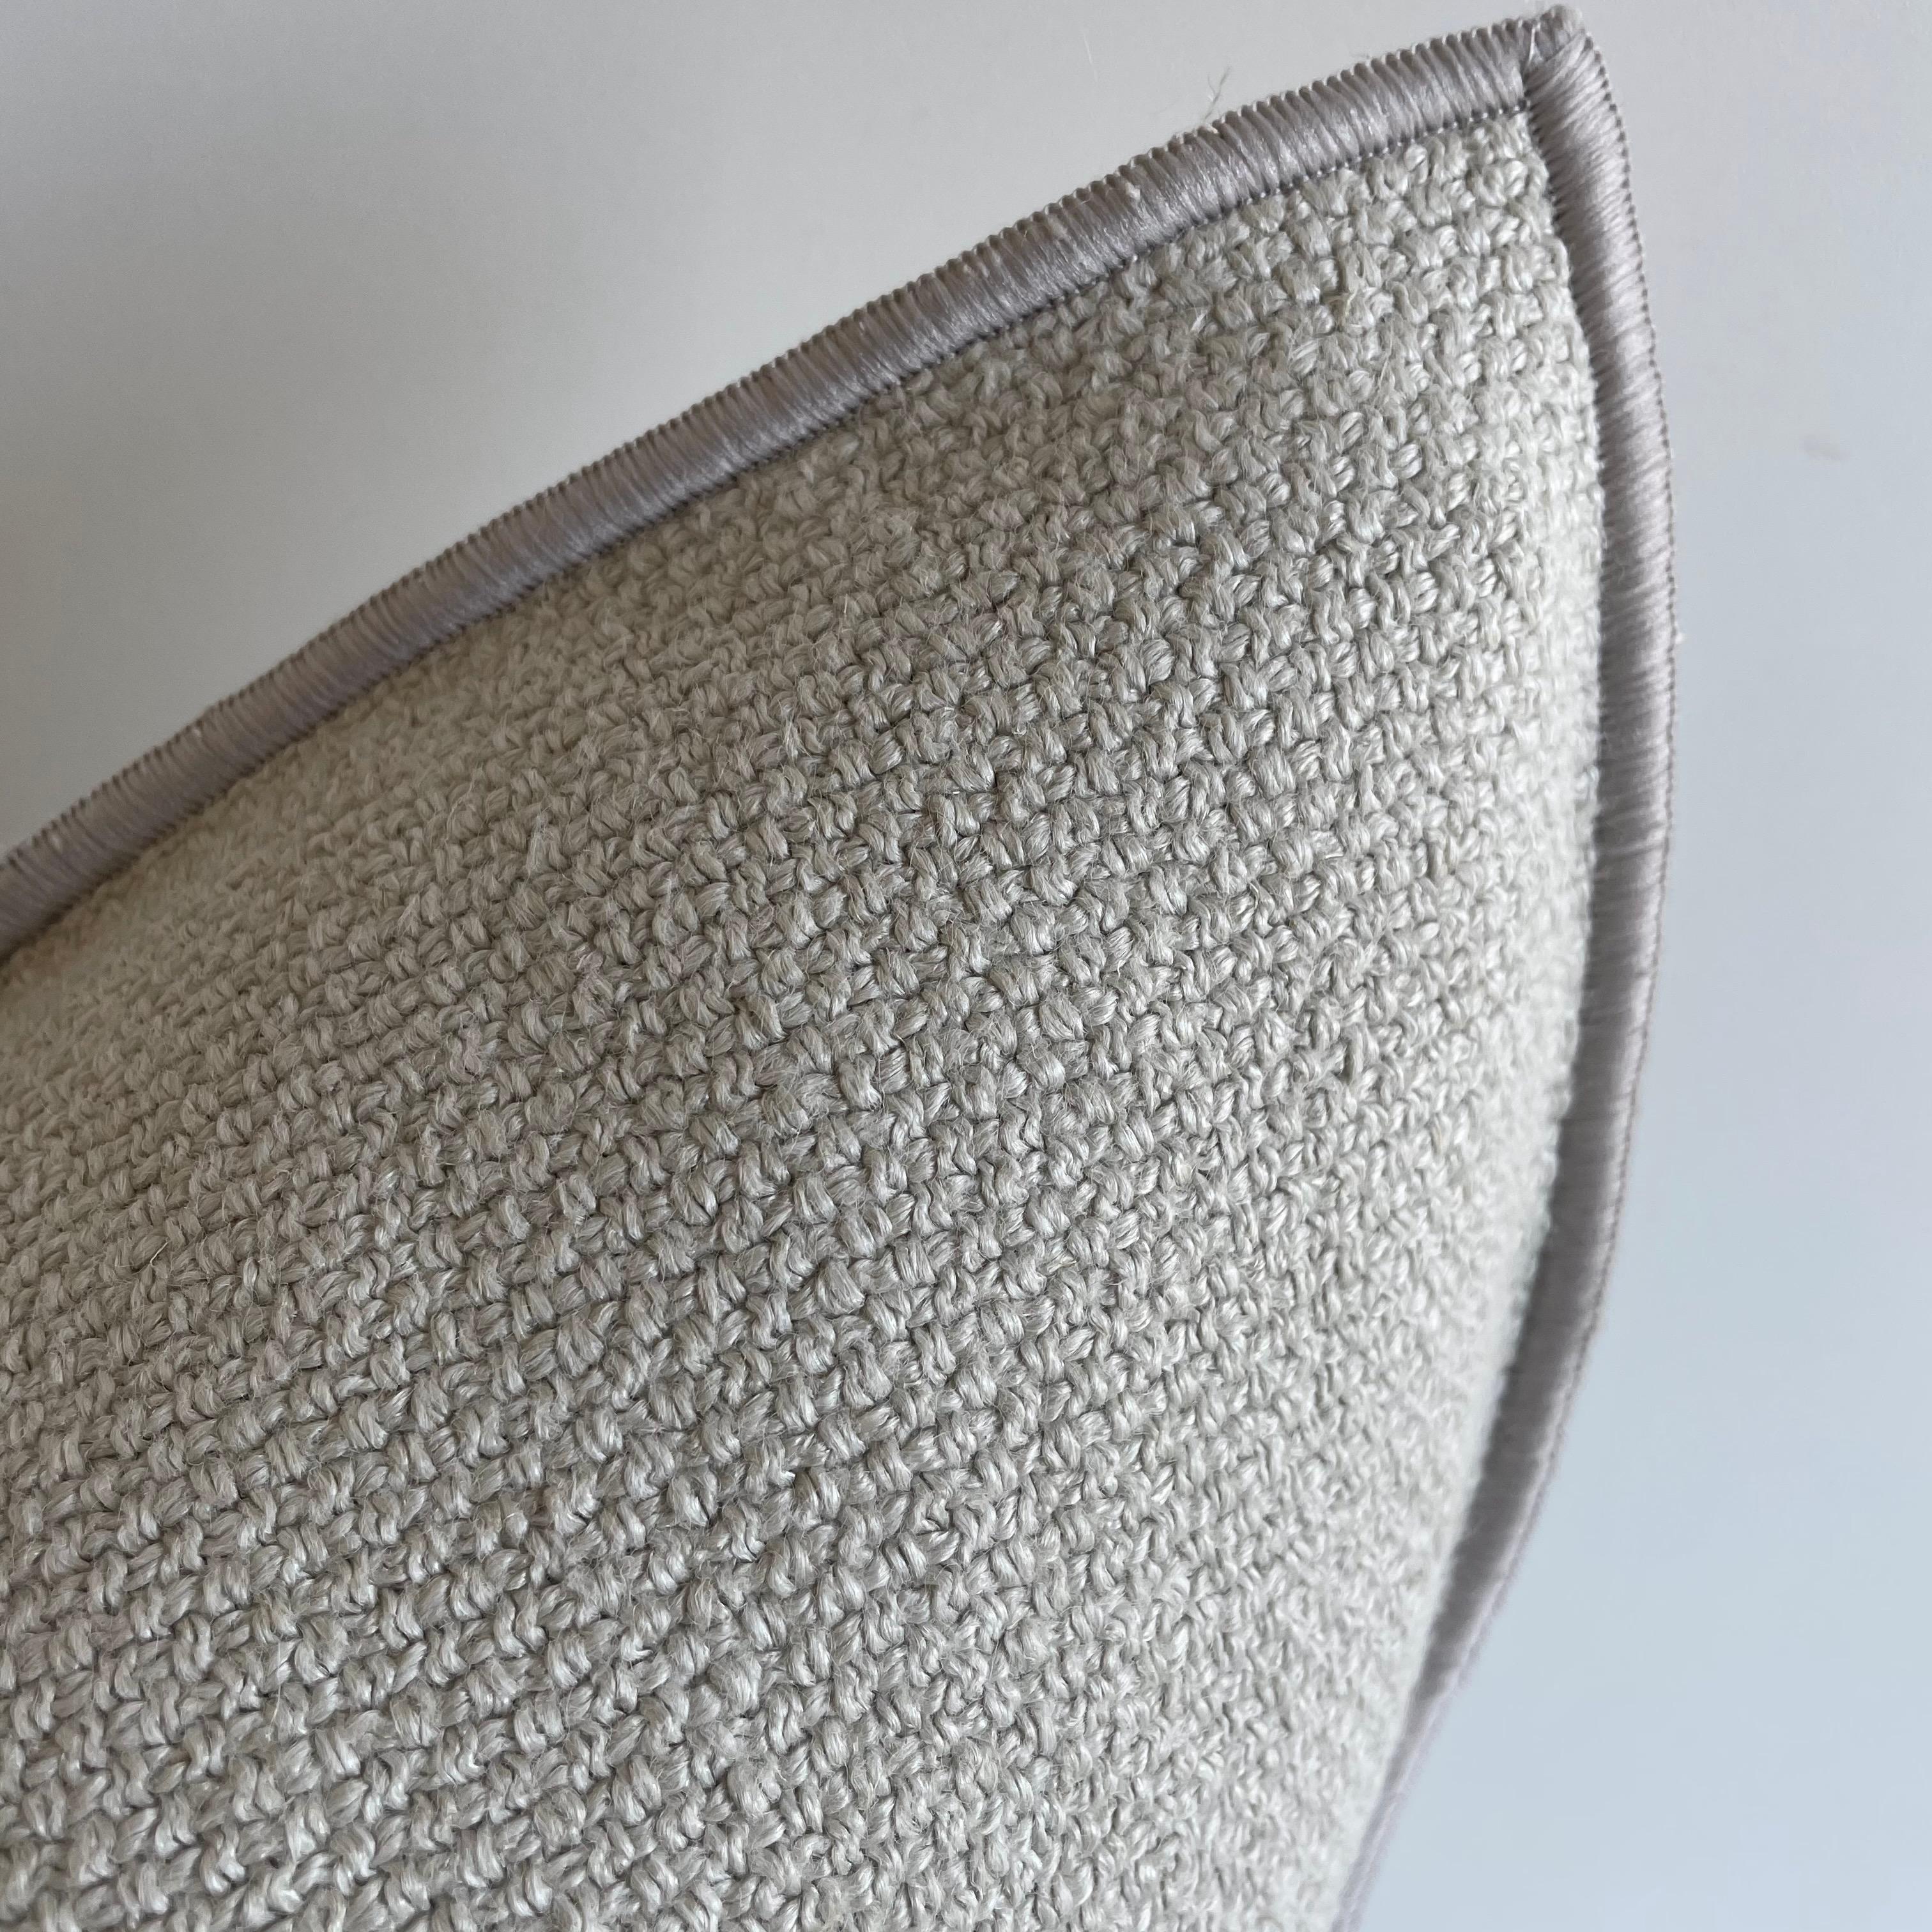 French linen light gray accent pillow. Metal zipper closure. Content: 50% linen, 24% cotton, 15% bamboo, 11% nylon. If this item is backordered please allow 6-8 weeks for production.
Size: 20